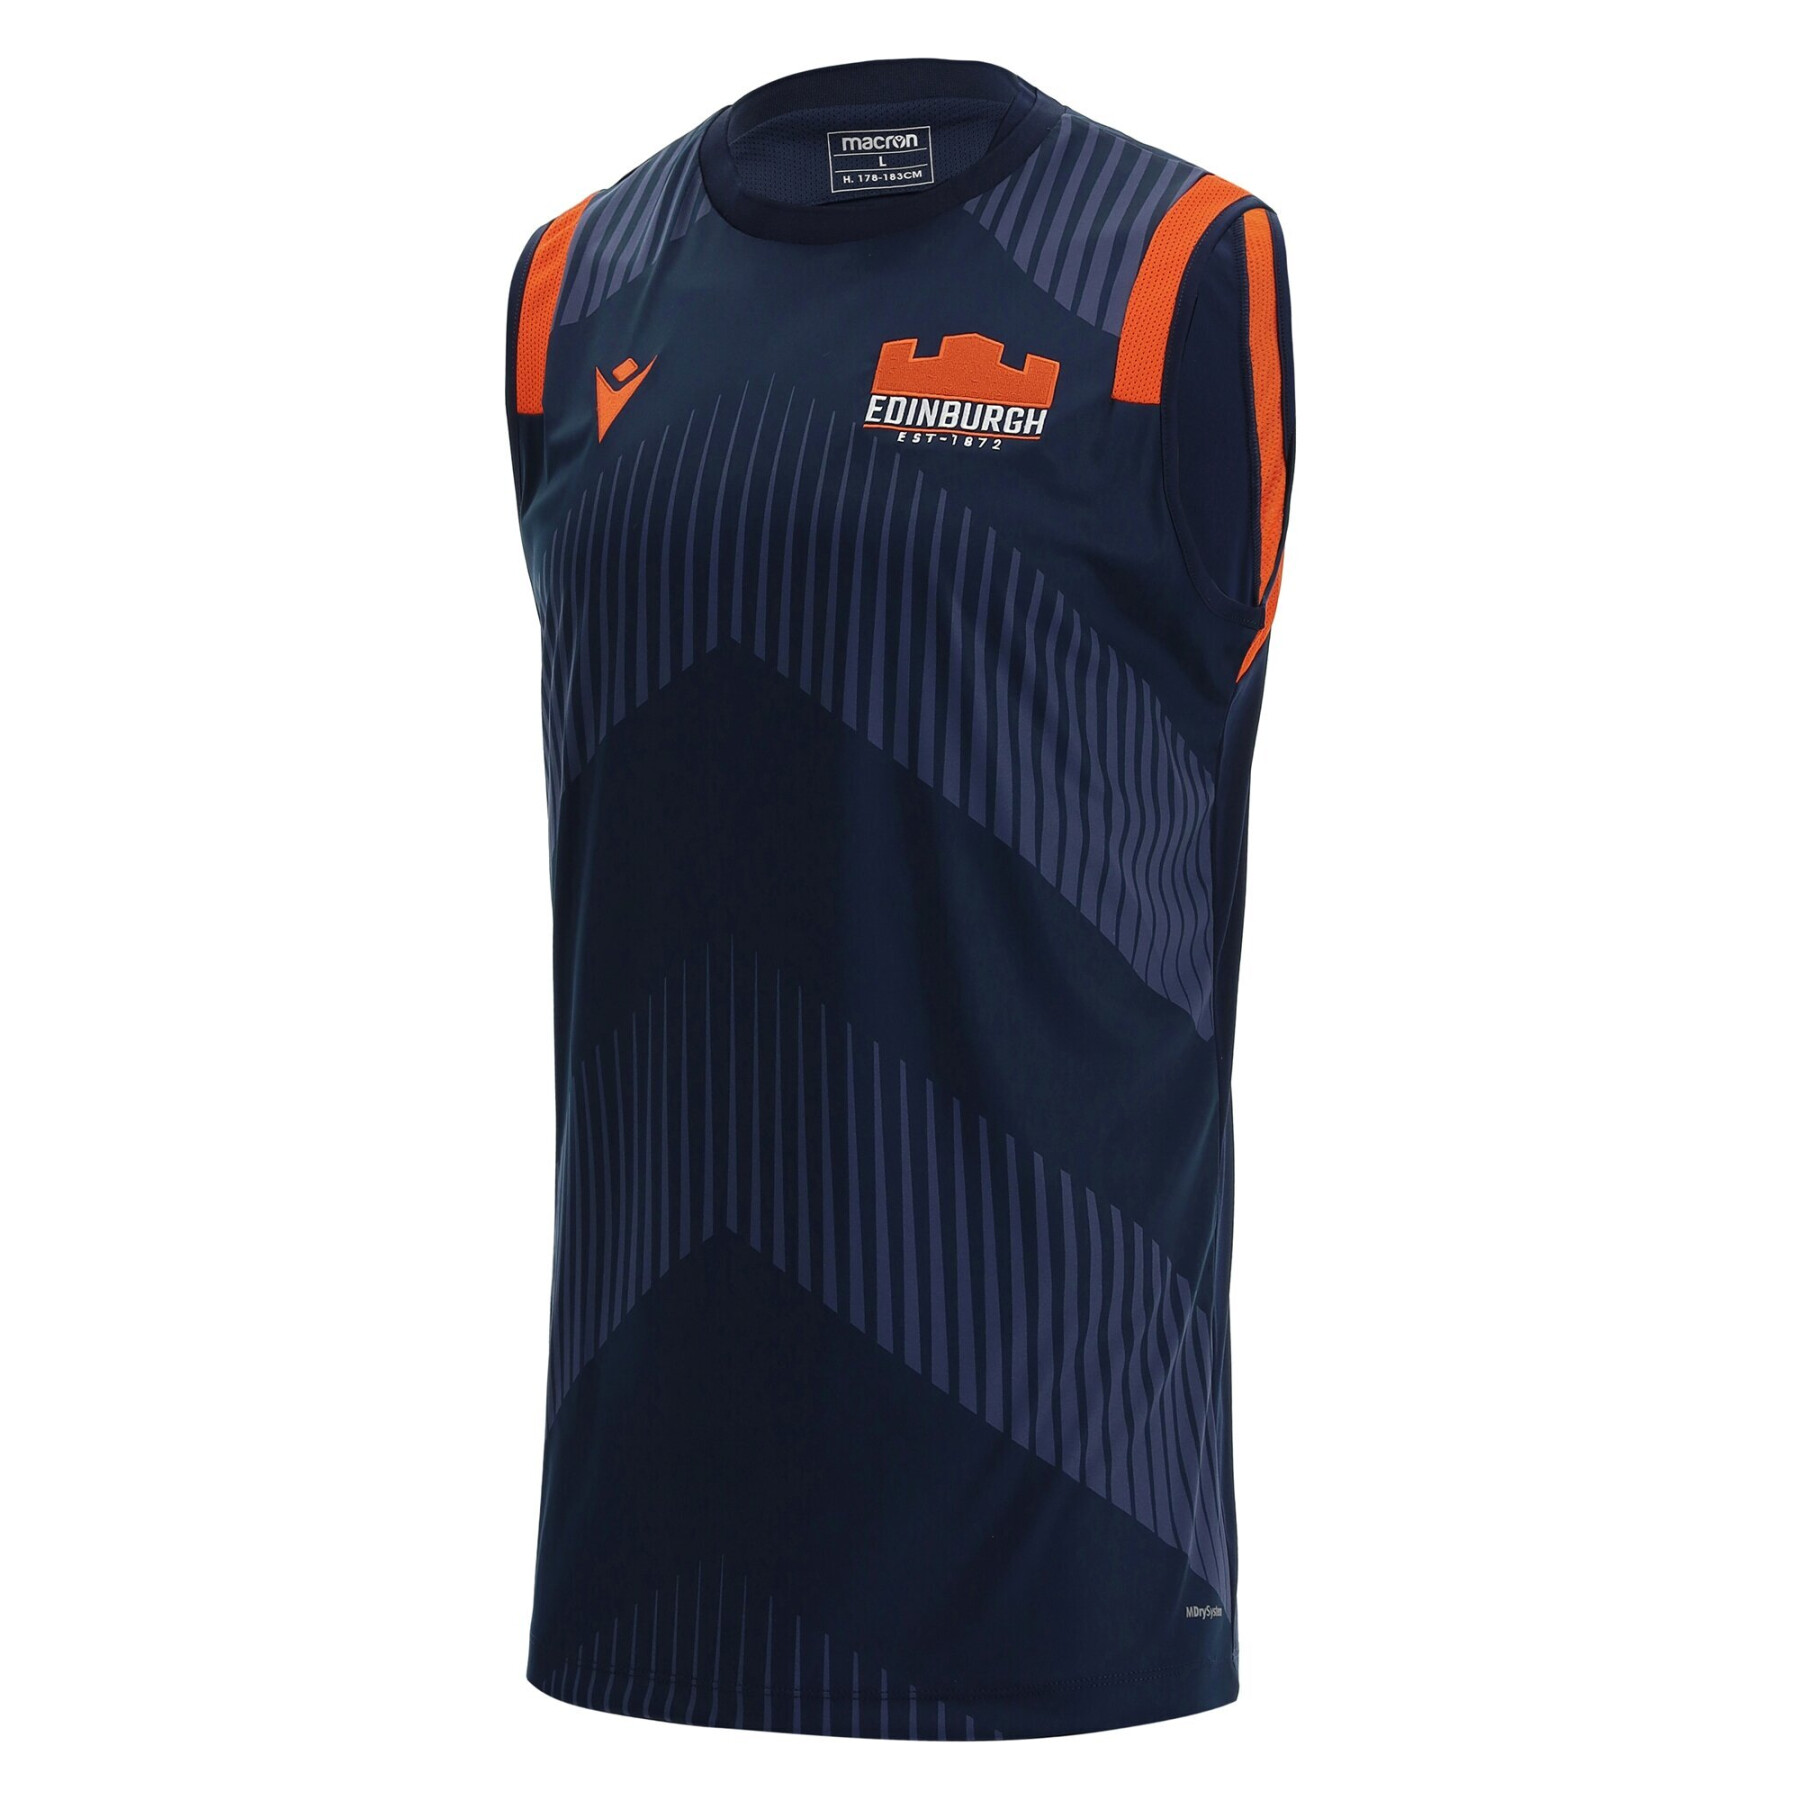 Maillot enfant Édimbourg Rugby 2019/20